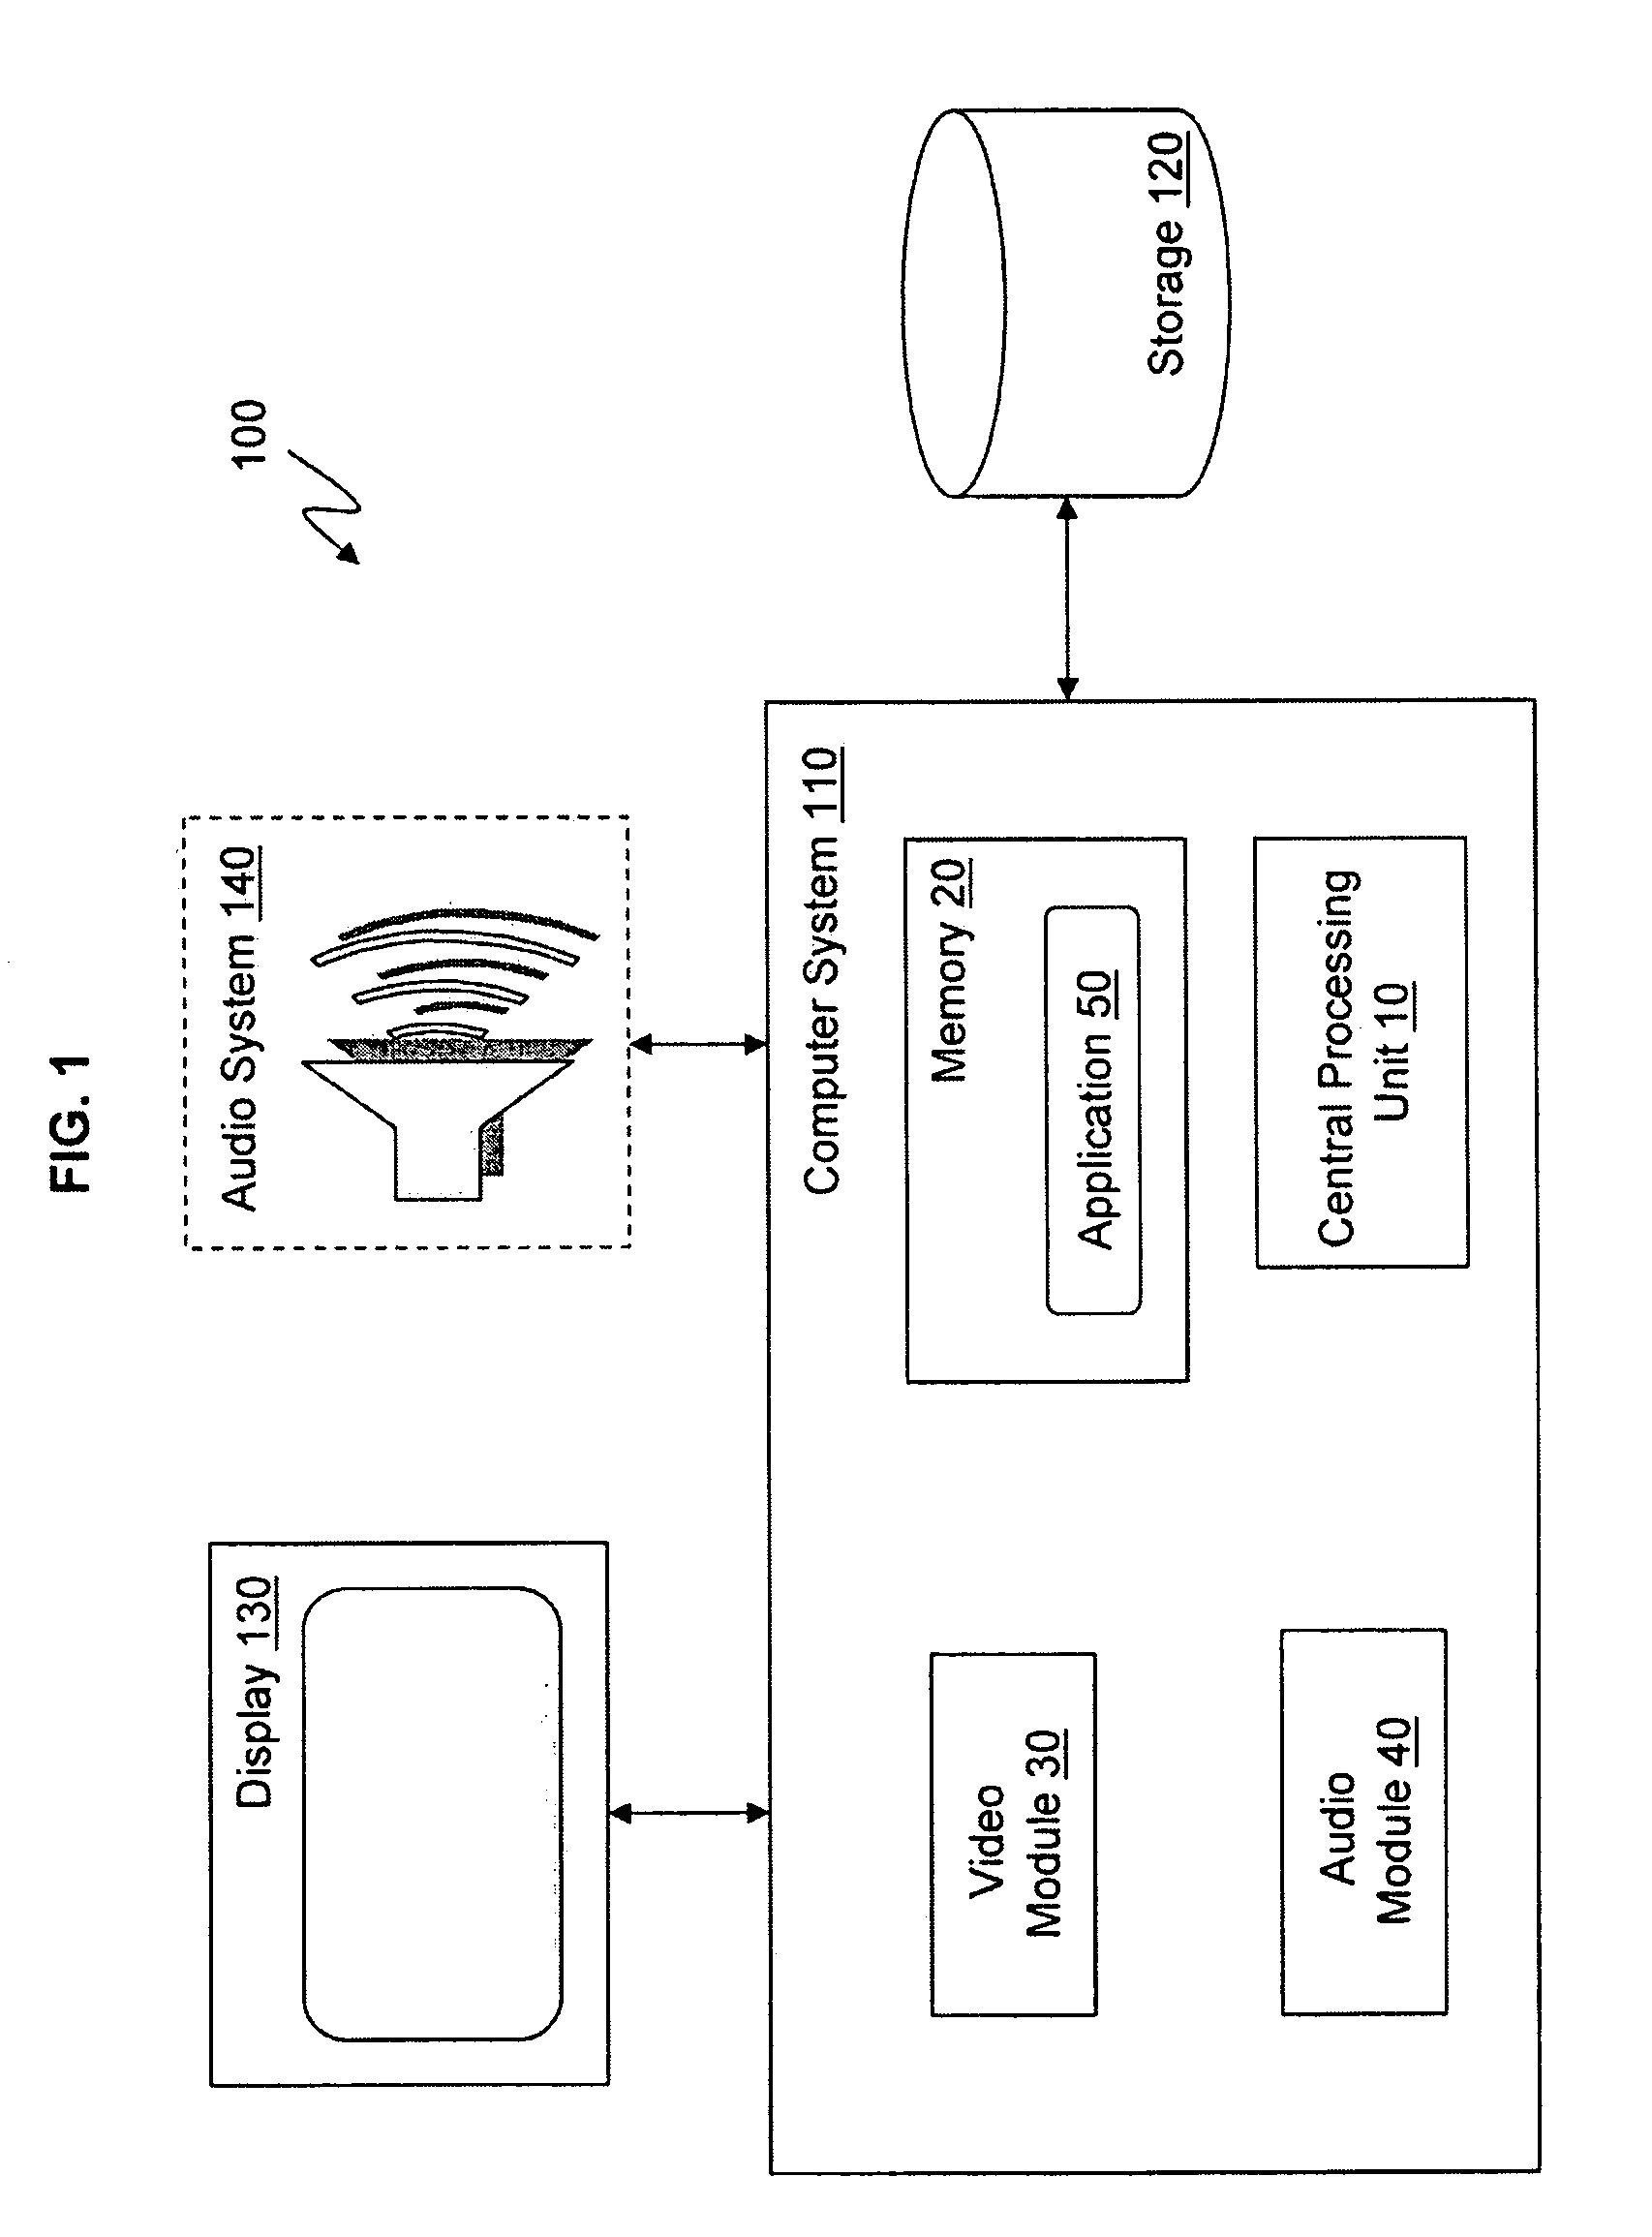 Methods for utilizing human perceptual systems for processing event log data